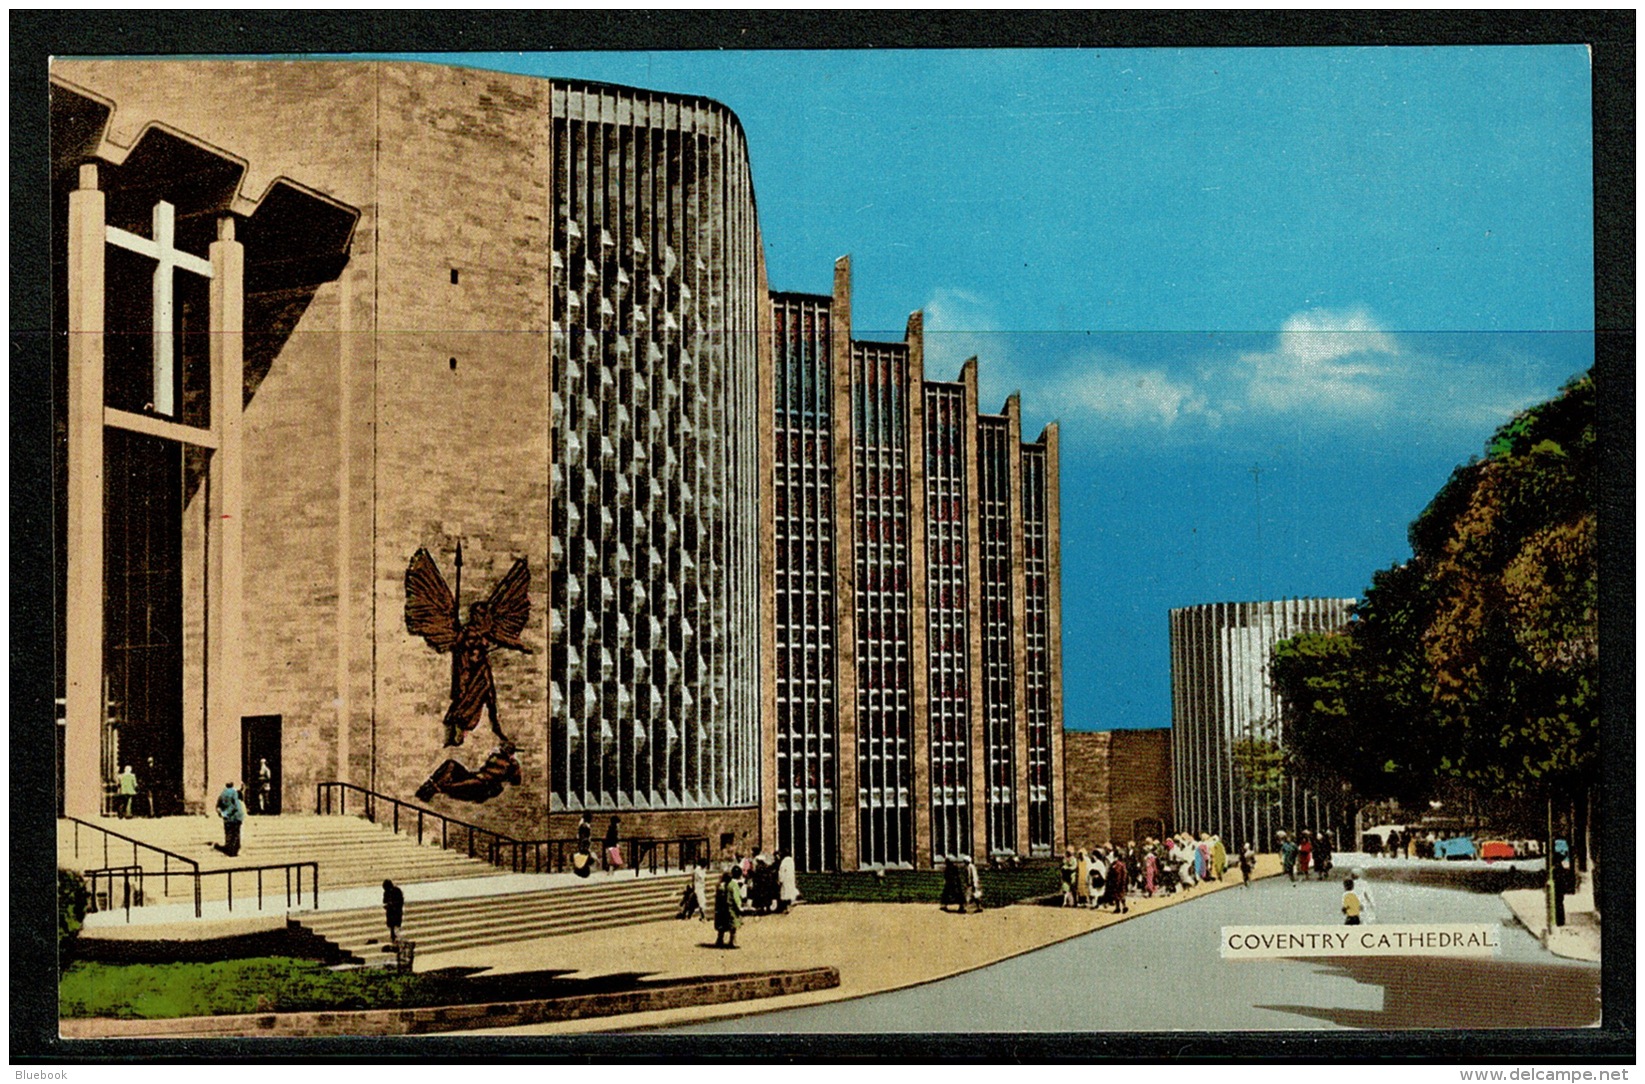 RB 1167 -  Kulerchrome Postcard - Coventry Cathedral - Warwickshire - Coventry